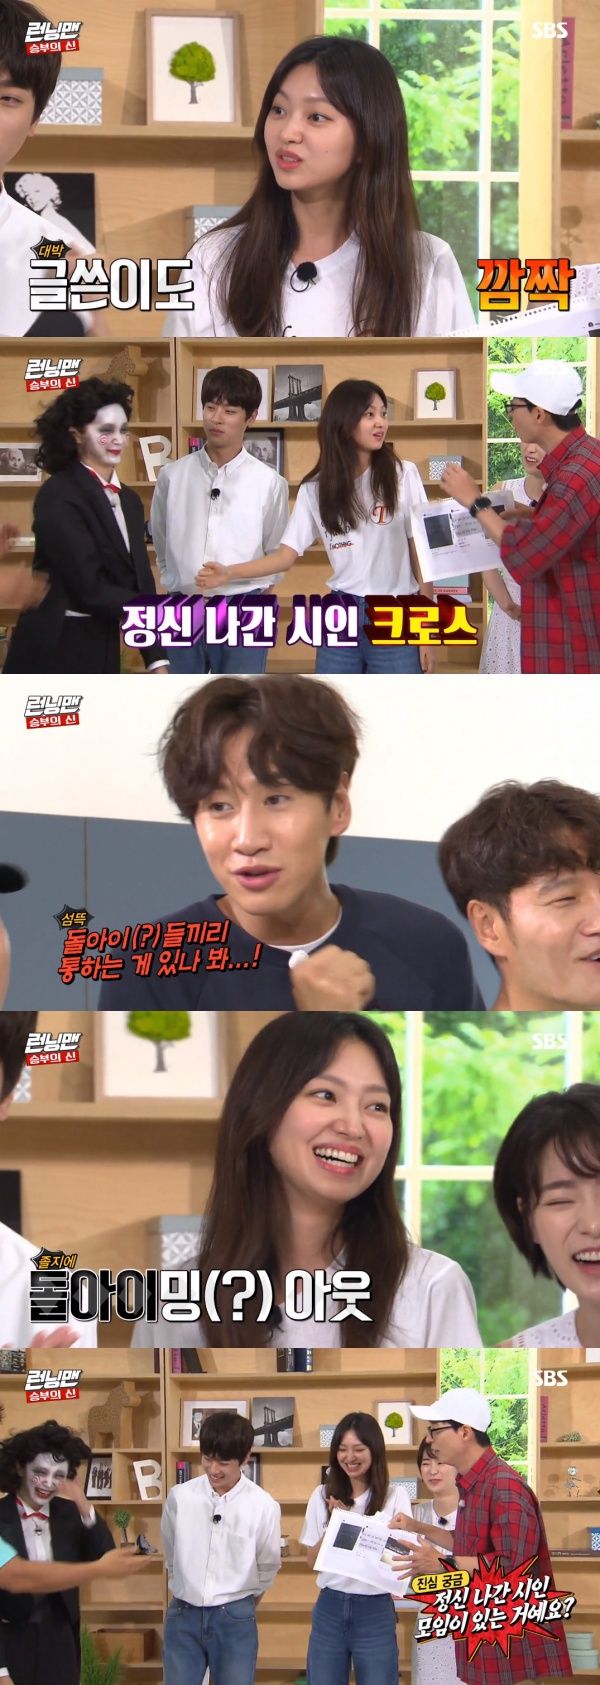 In Running Man, Choi You-Wha and Jeon So-min were heartbroken as Distracted Poet.On the 25th, SBS entertainment program Running Man starred actors Park Jung-min, Choi You-Wha and Lim Ji-yeon as guests of the movie Tazza: The High Rollers: One Eyed Jack.On the day of Choi You-Whas appearance, Yoo Jae-Suk released several SNS articles saying, Mr. Yoo Hwa often uploads emotional writing.Especially, I was shocked by the release of I am not ready to get snowy yet.So, Jeon So-min, called The Crazy Poet, interpreted Choi You-Whas writing: Its a double meaning.Im not ready to get snowed (with someone else) and Im not ready to get snowed (from the sky), he explained.Choi You-Wha was surprised to say its real to Jeon So-min, who correctly grasped his meaning.Lee Kwang-soo, who watched this, laughed, saying, I think there is something between the stone children. Yoo Jae-Suk also asked, Do you have a crazy Poet meeting?